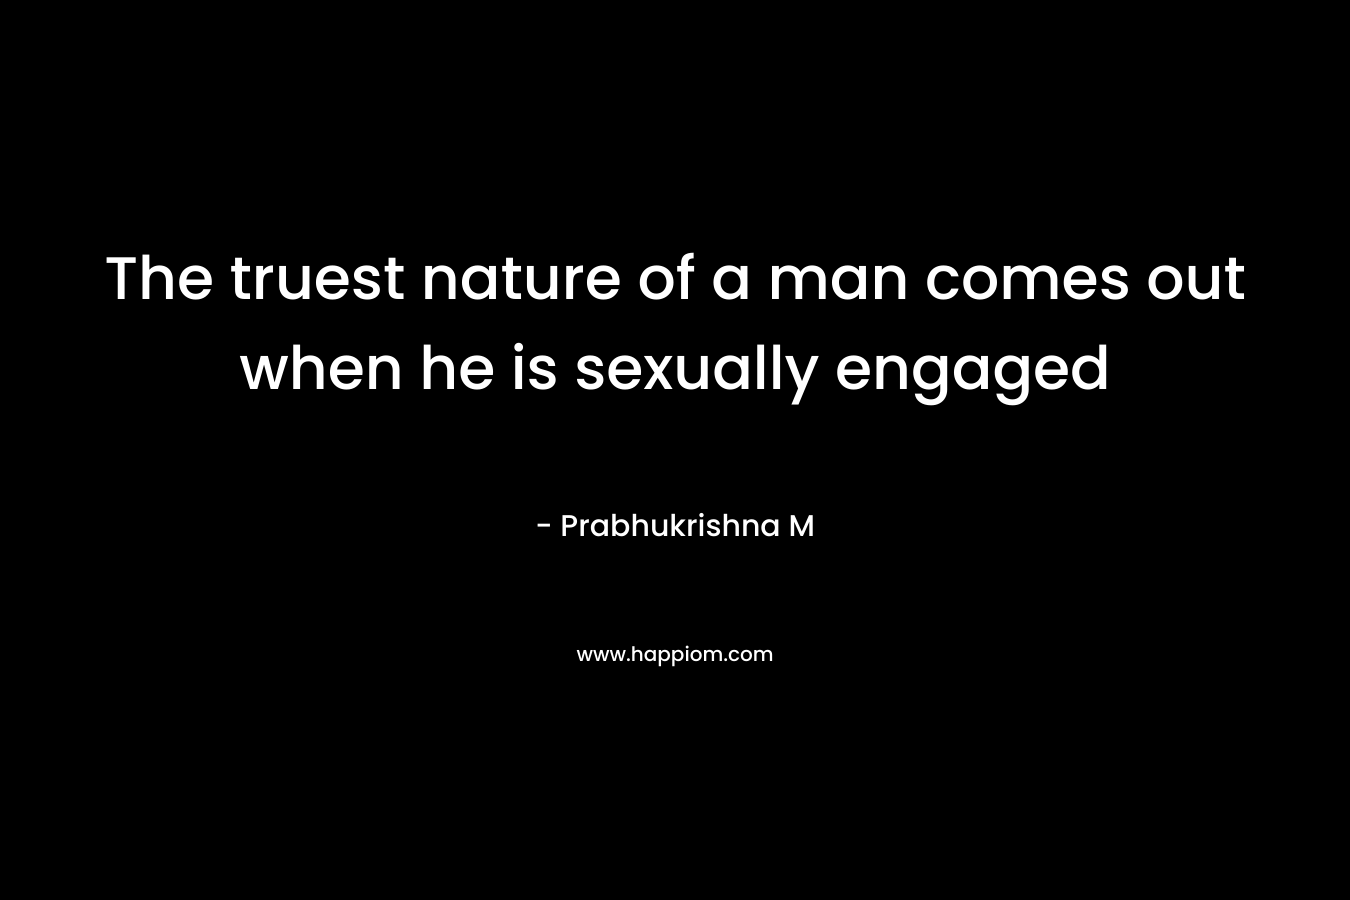 The truest nature of a man comes out when he is sexually engaged – Prabhukrishna M